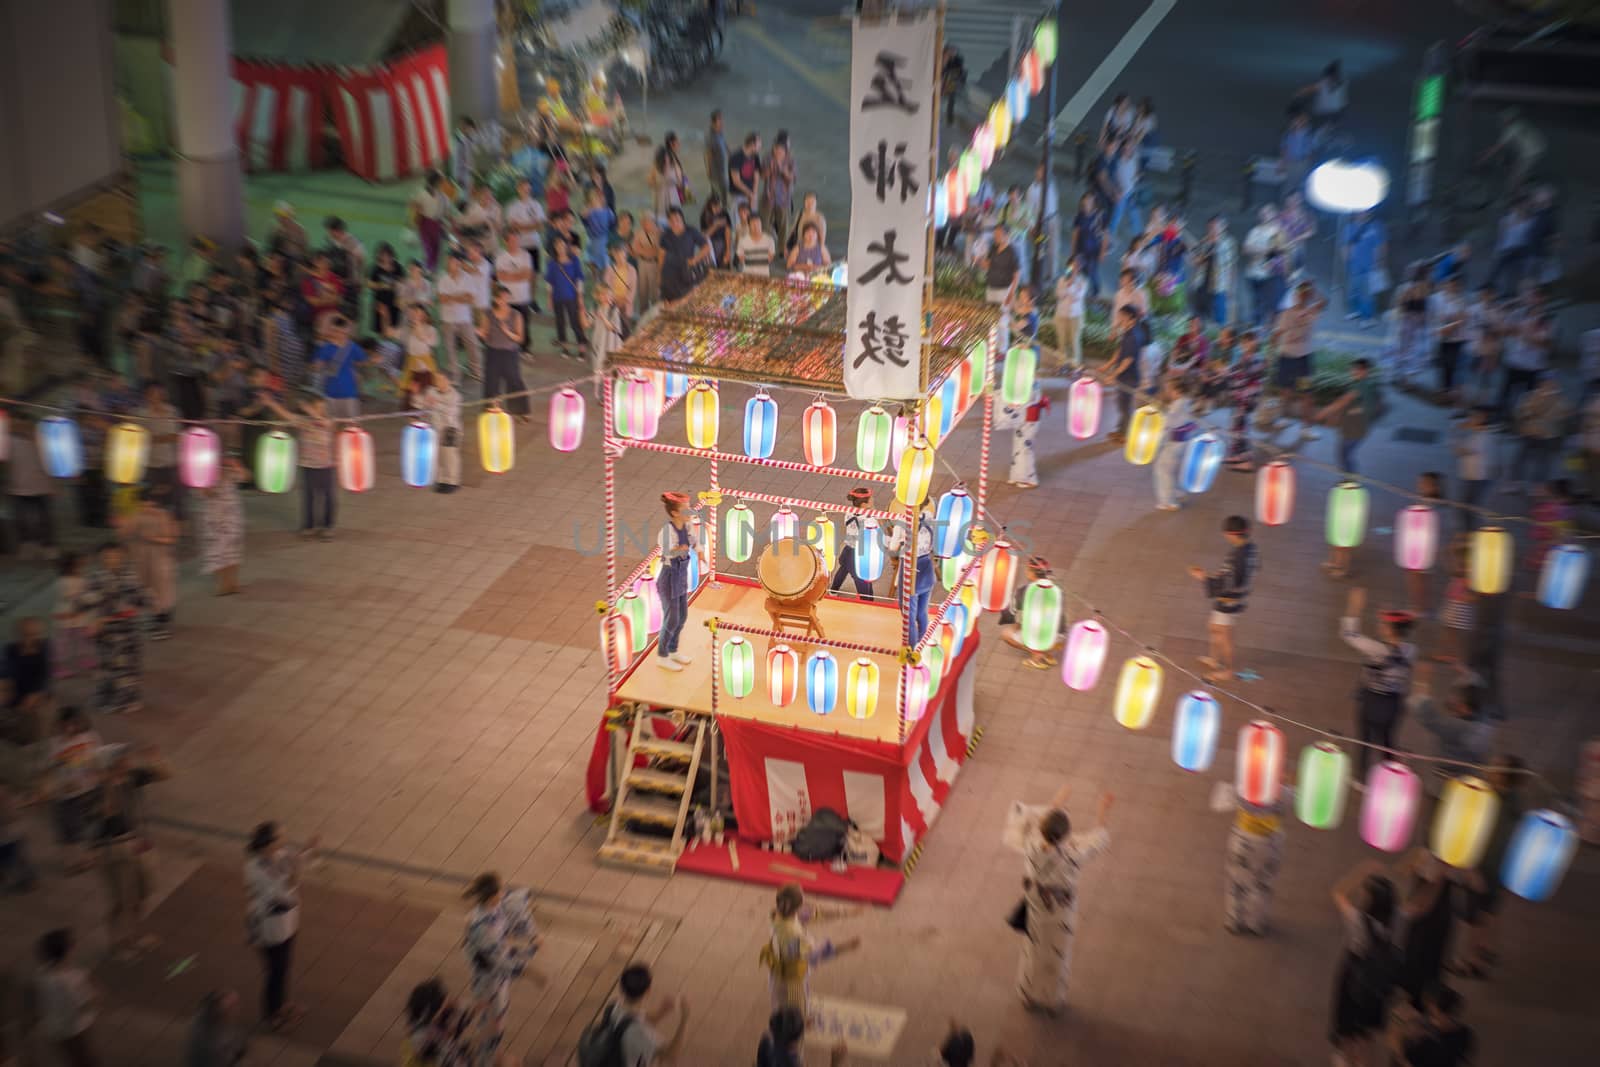 View of the square in front of the Nippori train station decorated for the Obon festival with illuminated paper lanterns  in the summer night with a yagura tower and paper lanterns in the Arakawa district of Tokyo.